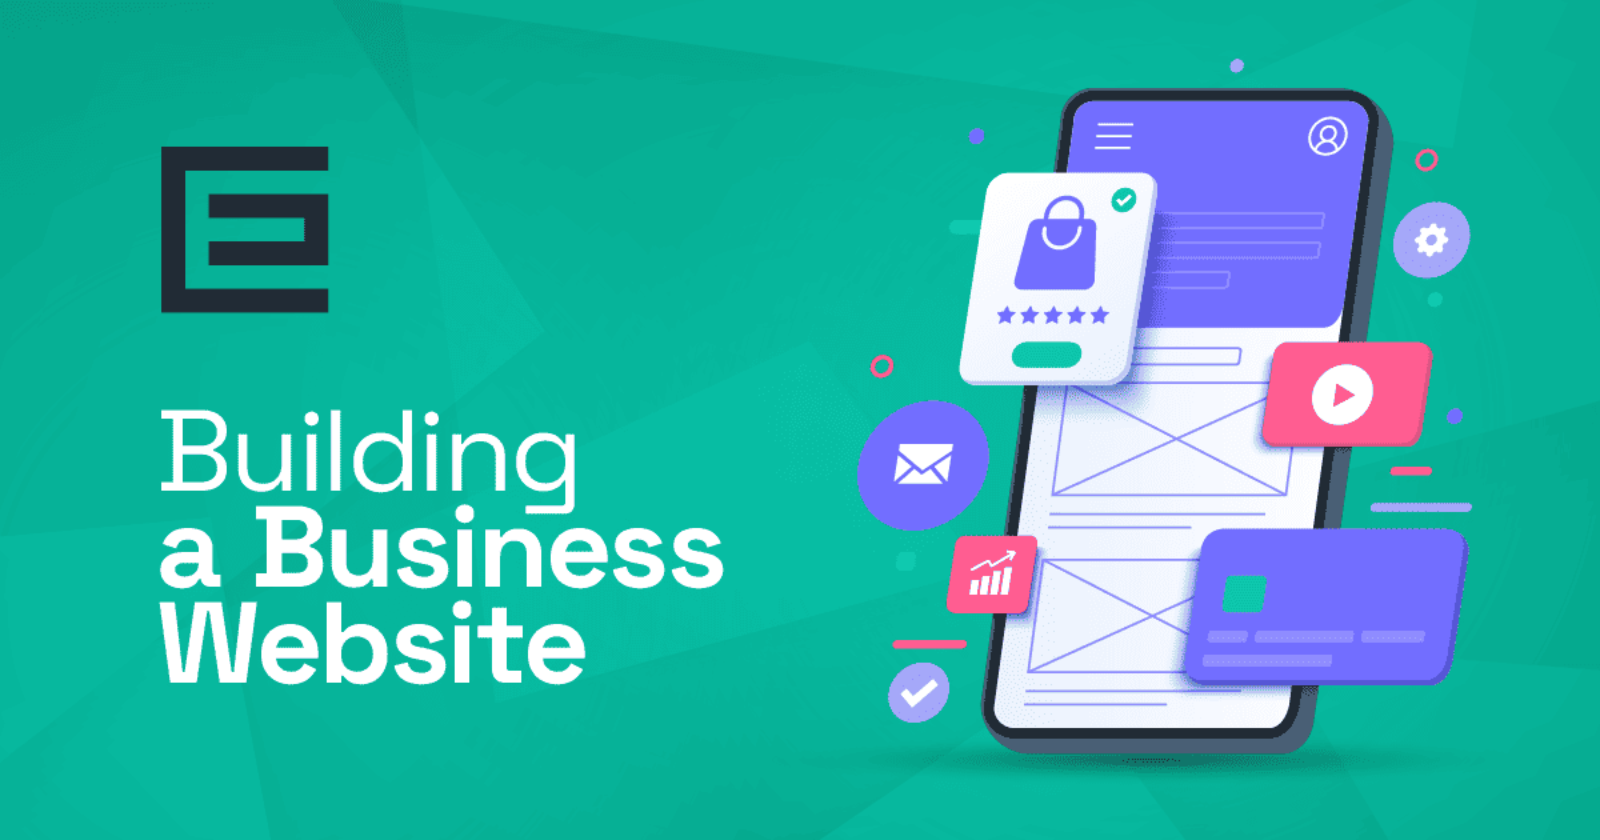 Building a Business Website: Our step-by-step guide-Punjabit.co